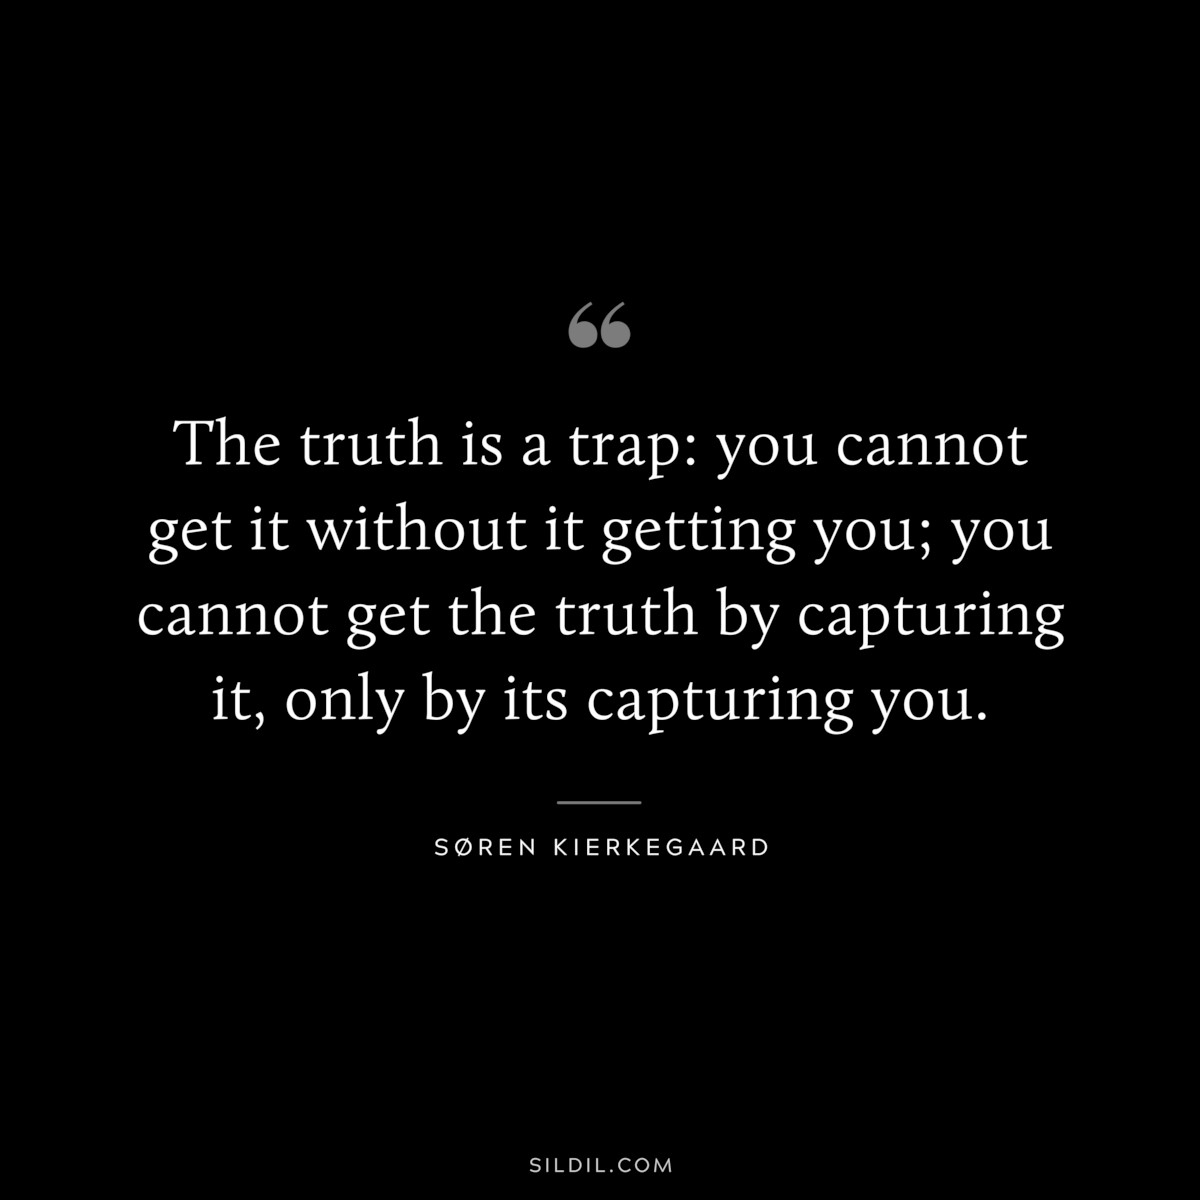 The truth is a trap: you cannot get it without it getting you; you cannot get the truth by capturing it, only by its capturing you. ― Søren Kierkegaard